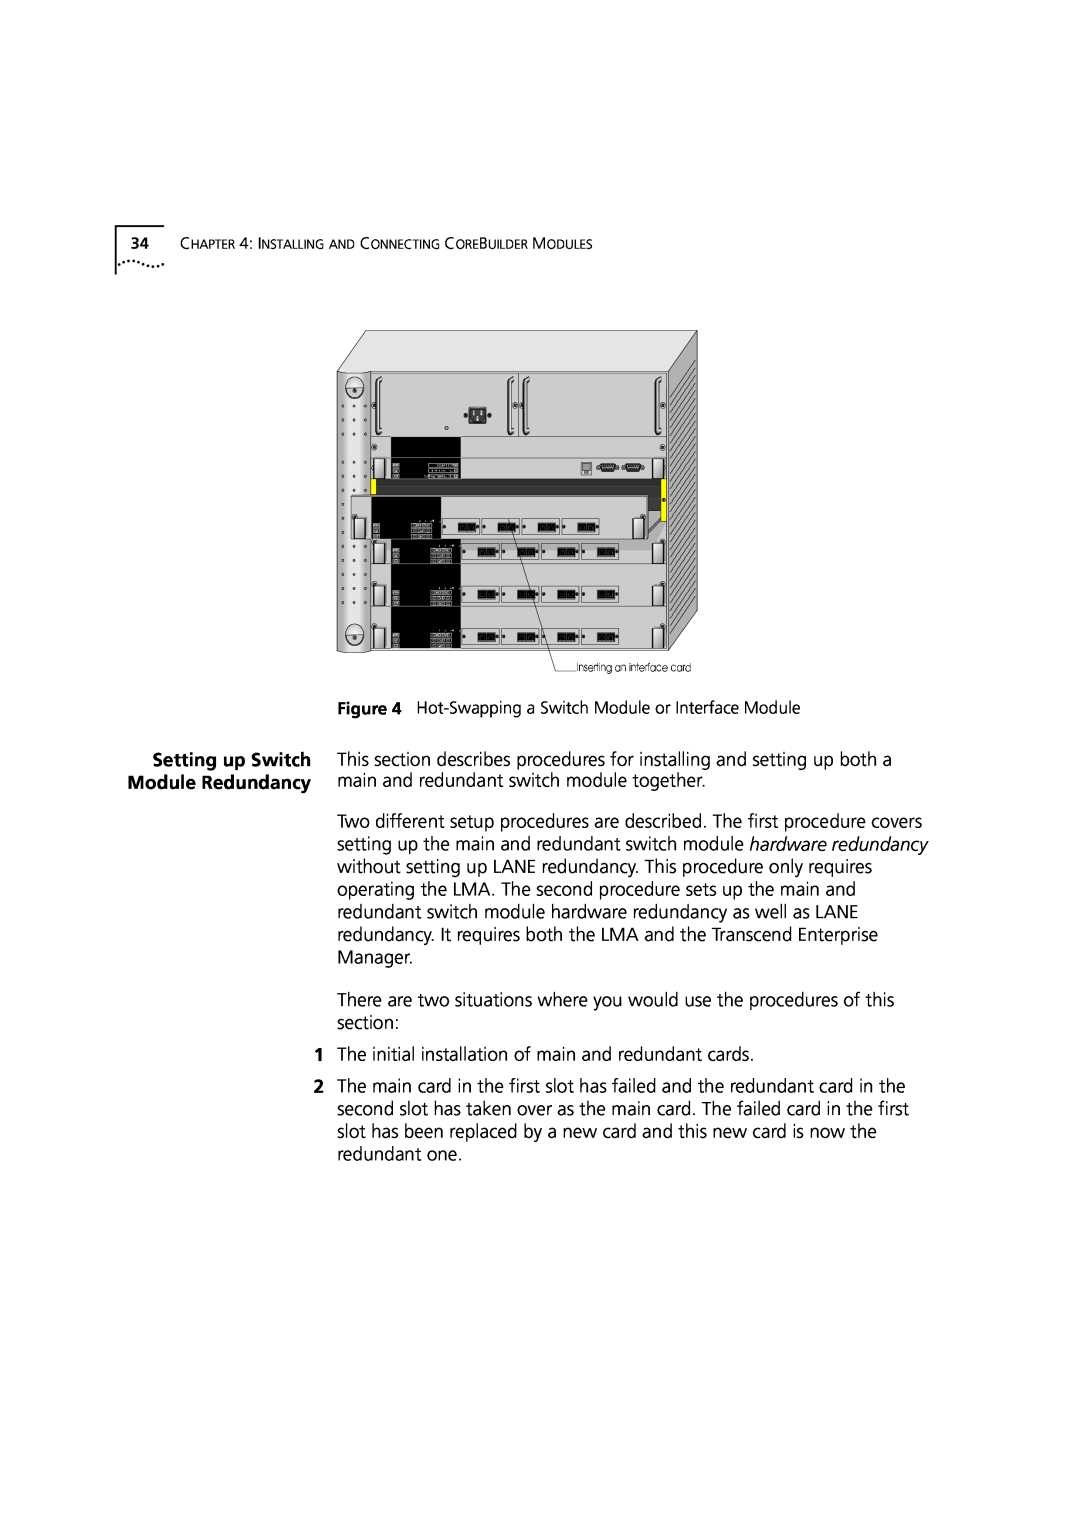 3Com 7000 manual The initial installation of main and redundant cards 